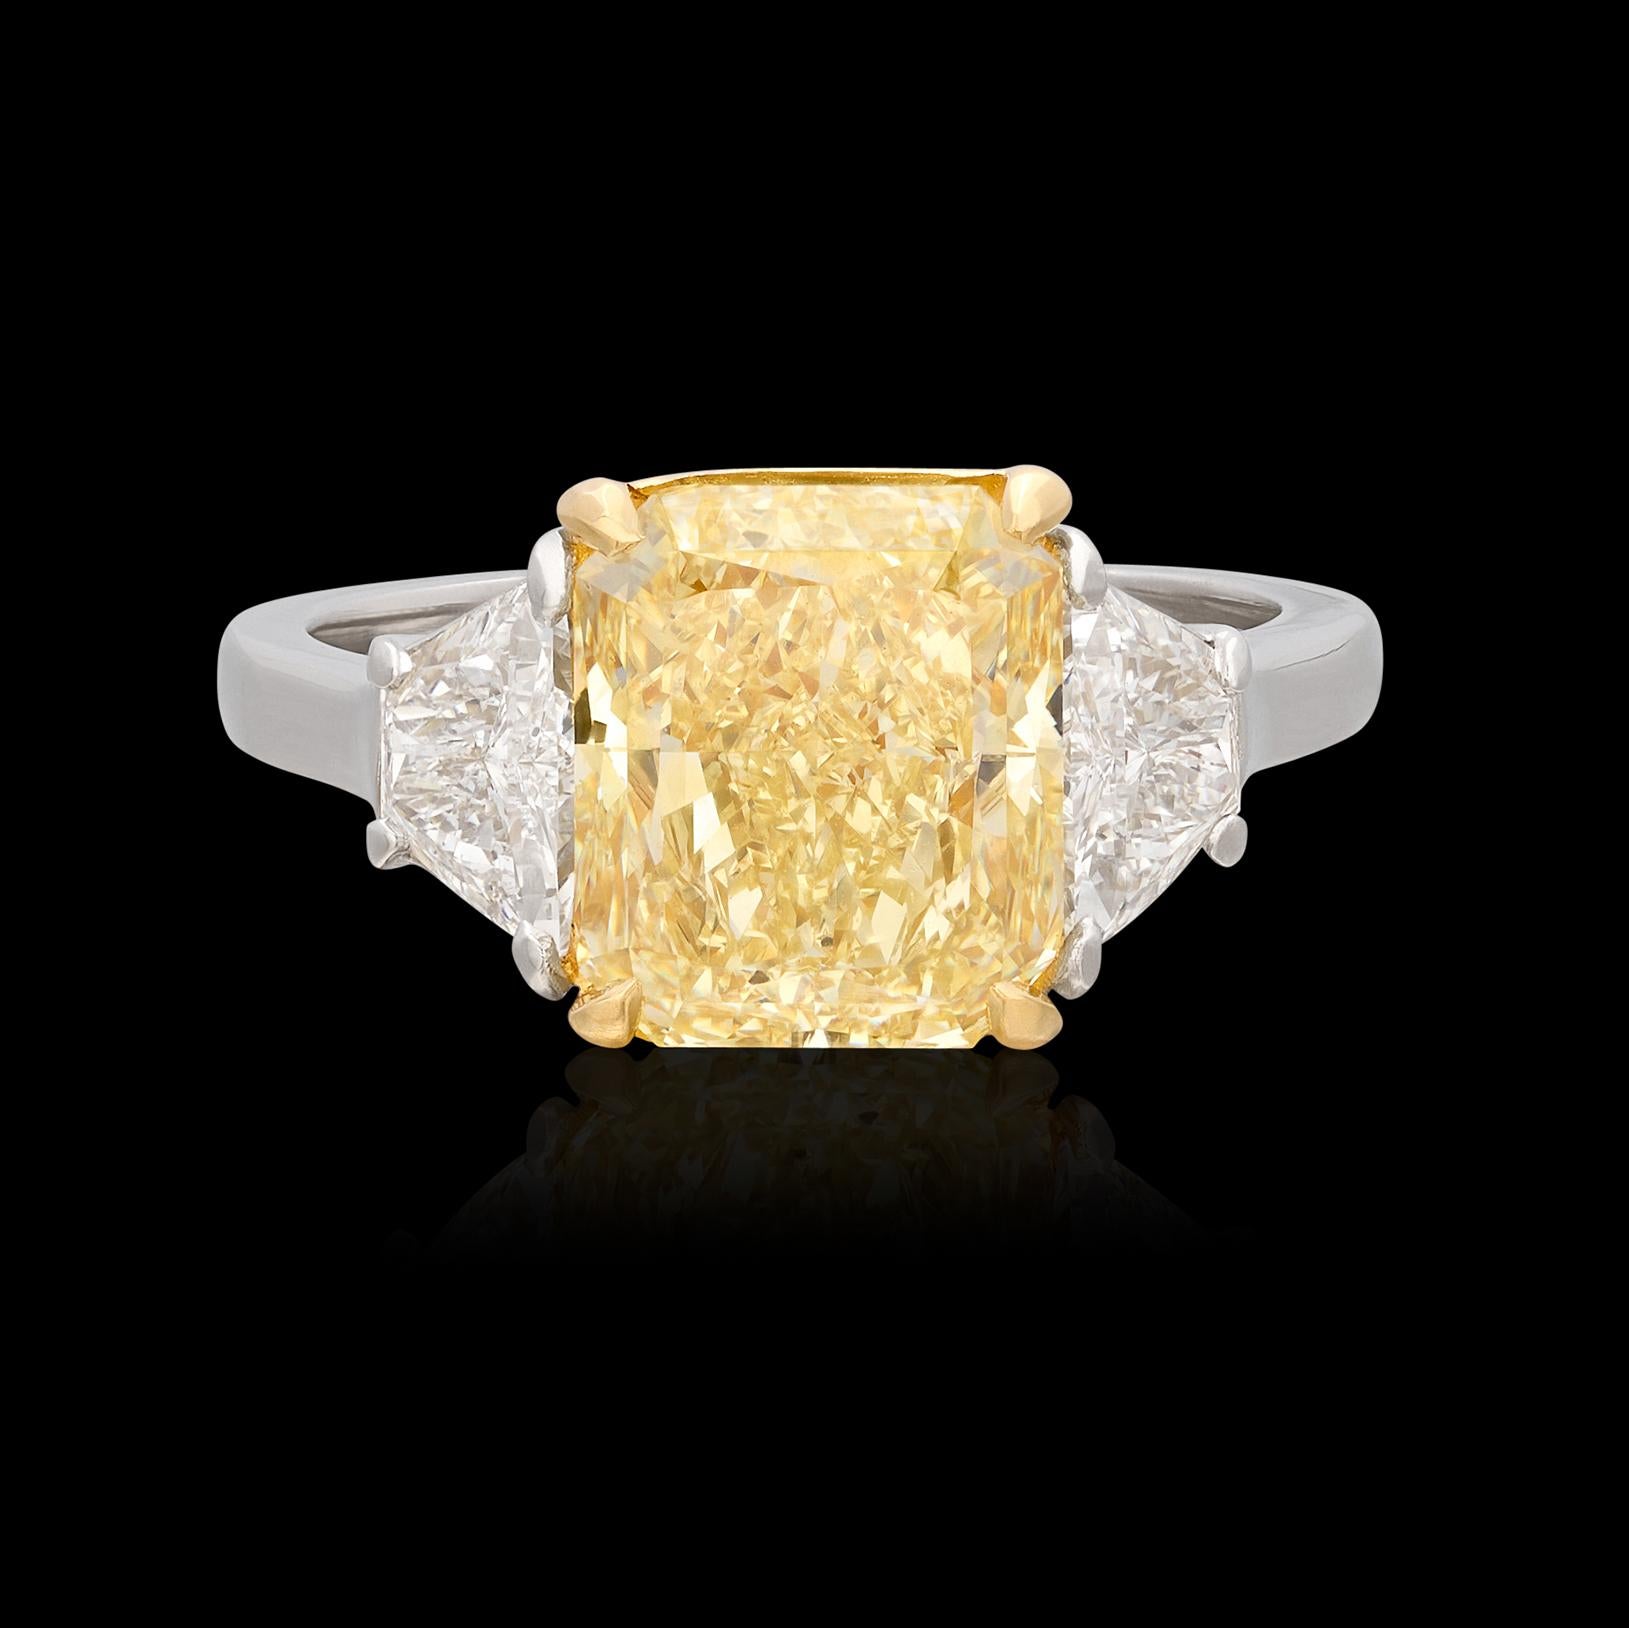 A genuine showstopper! Show your true colors with this extraordinary Cartier stamped diamond ring featuring a 4.30 carat GIA Fancy Yellow Radiant Cut Natural Diamond flanked on either side by phenomenal Trapezoid Cut Diamonds weighing together 1.50